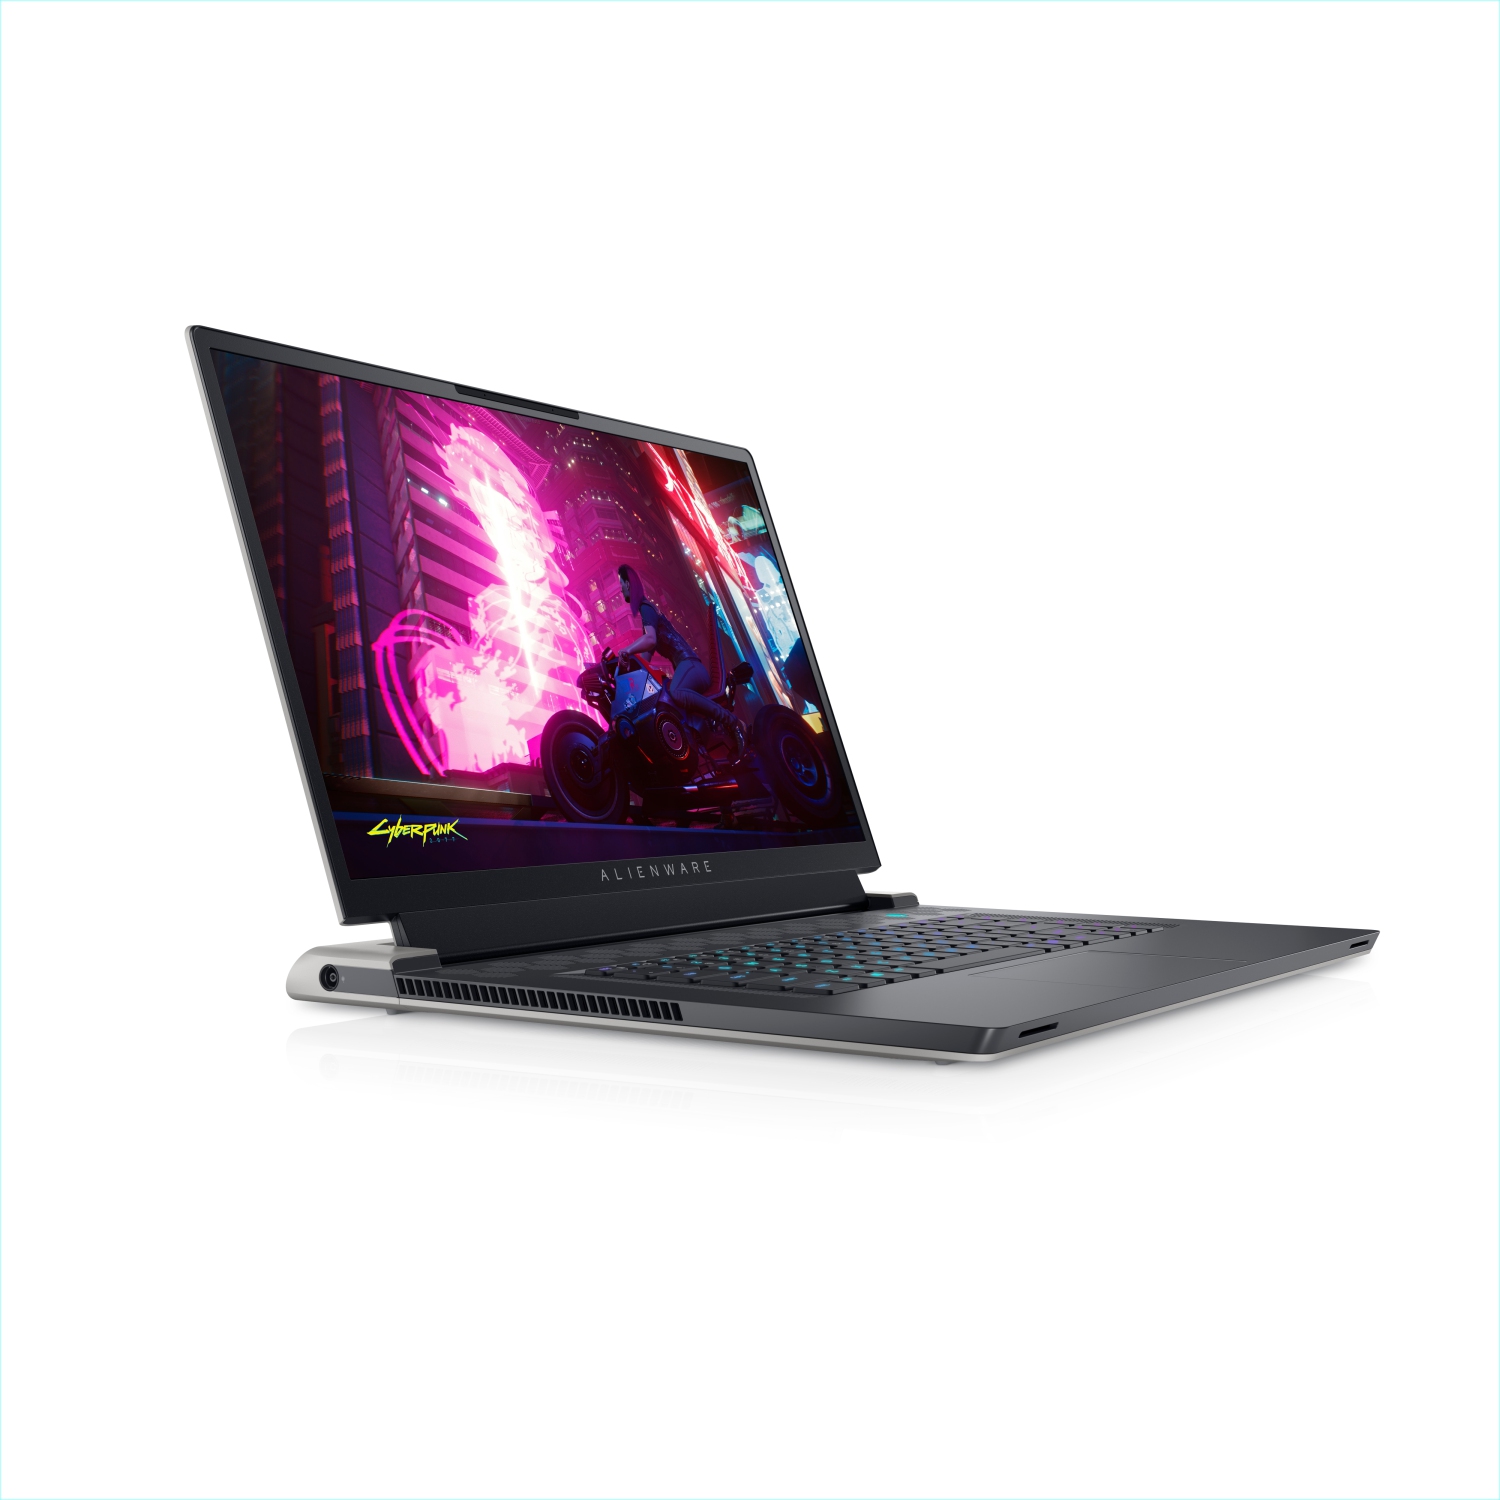 Refurbished (Excellent) - Dell Alienware X17 R1 Gaming Laptop (2021), 17.3" FHD, Core i7, 1TB SSD, 32GB RAM, RTX 3070, 8 Cores @ 4.6 GHz, 11th Gen CPU Certified